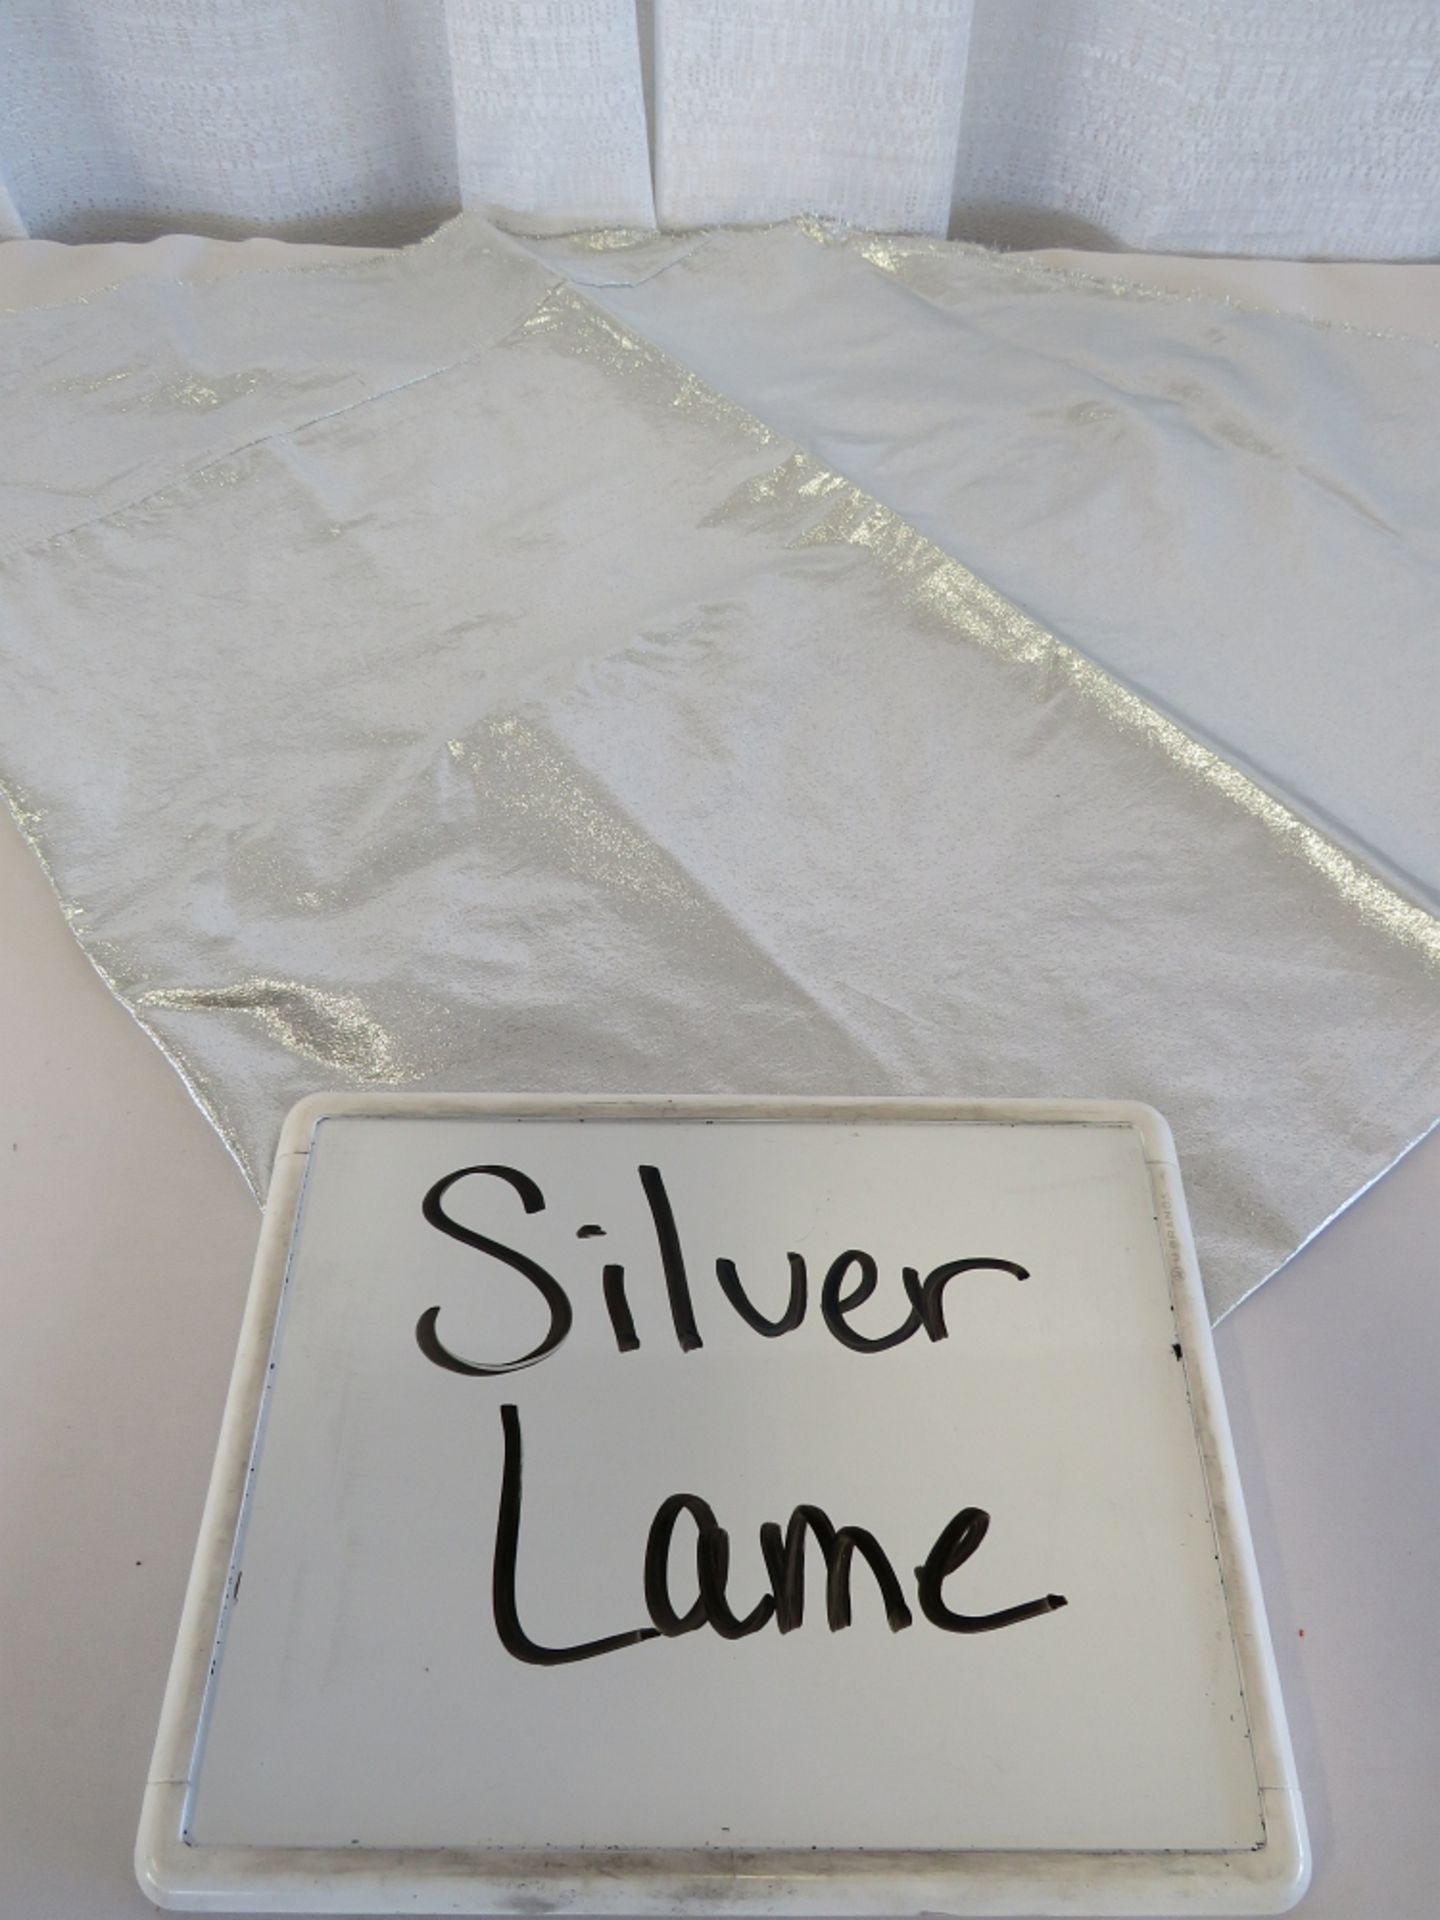 60" Round Tablecloth, Silver Lame